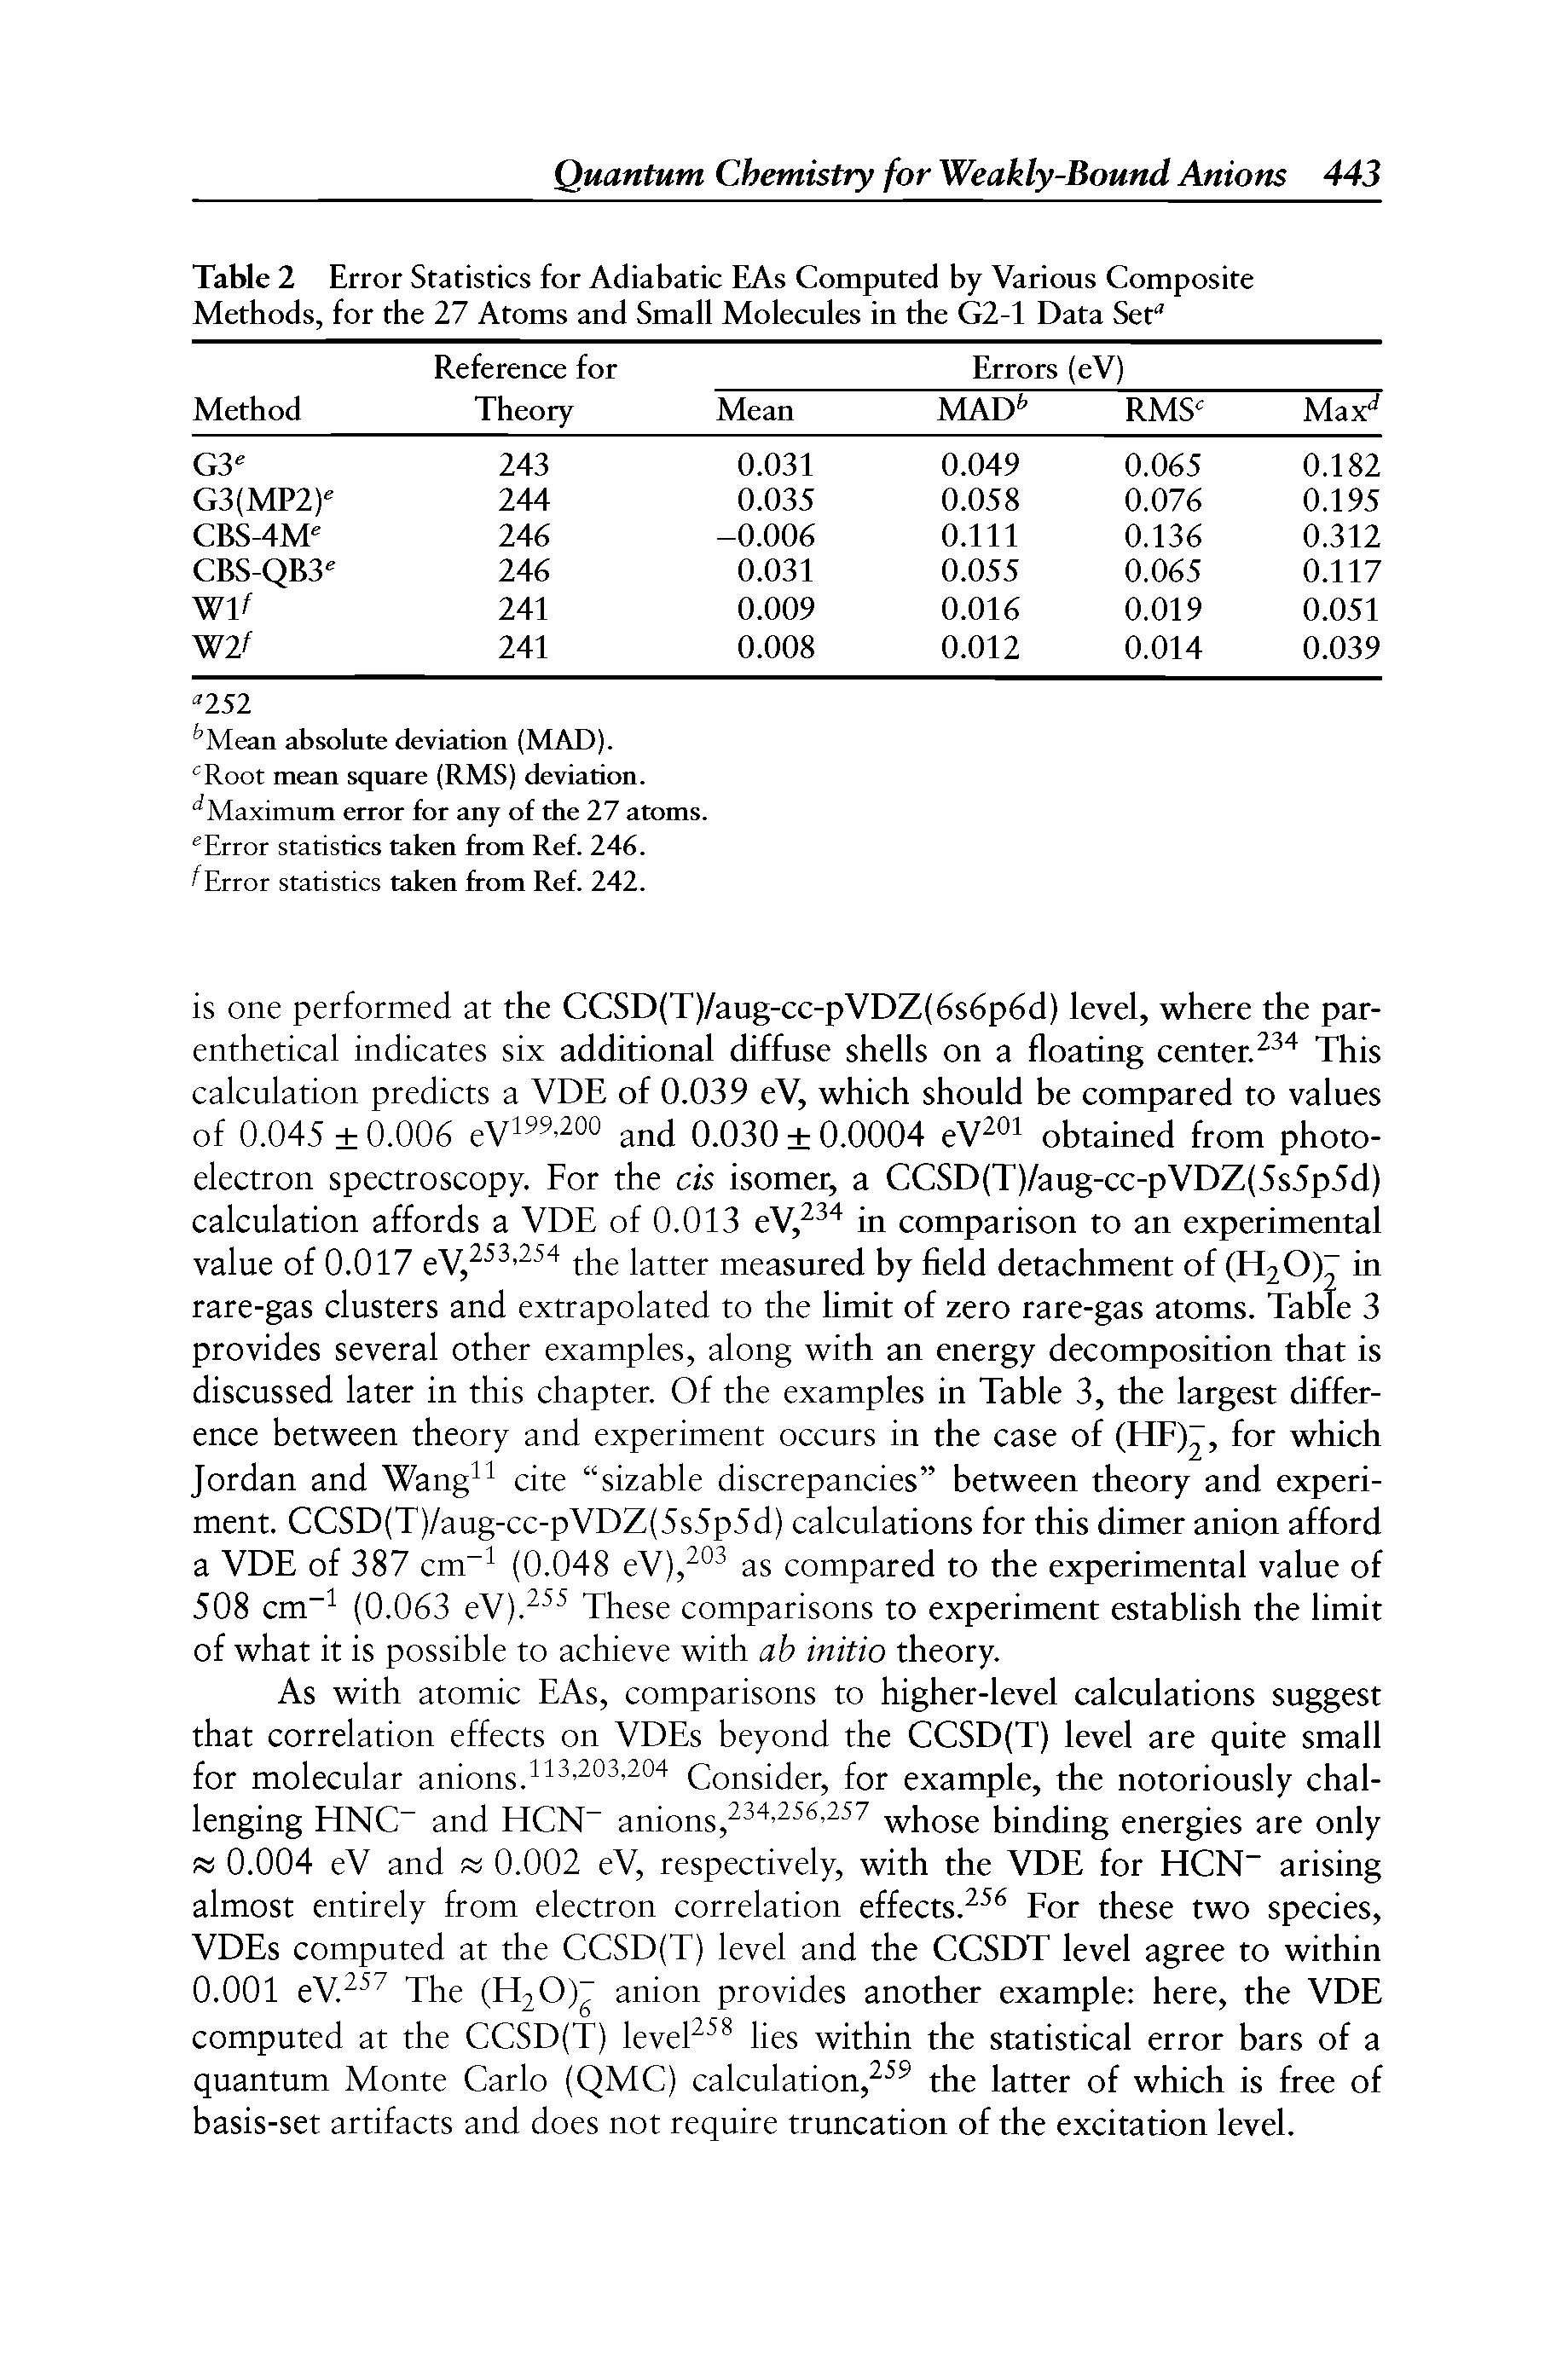 Table 2 Error Statistics for Adiabatic EAs Computed by Various Composite Methods, for the 27 Atoms and Small Molecules in the G2-1 Data Set"...